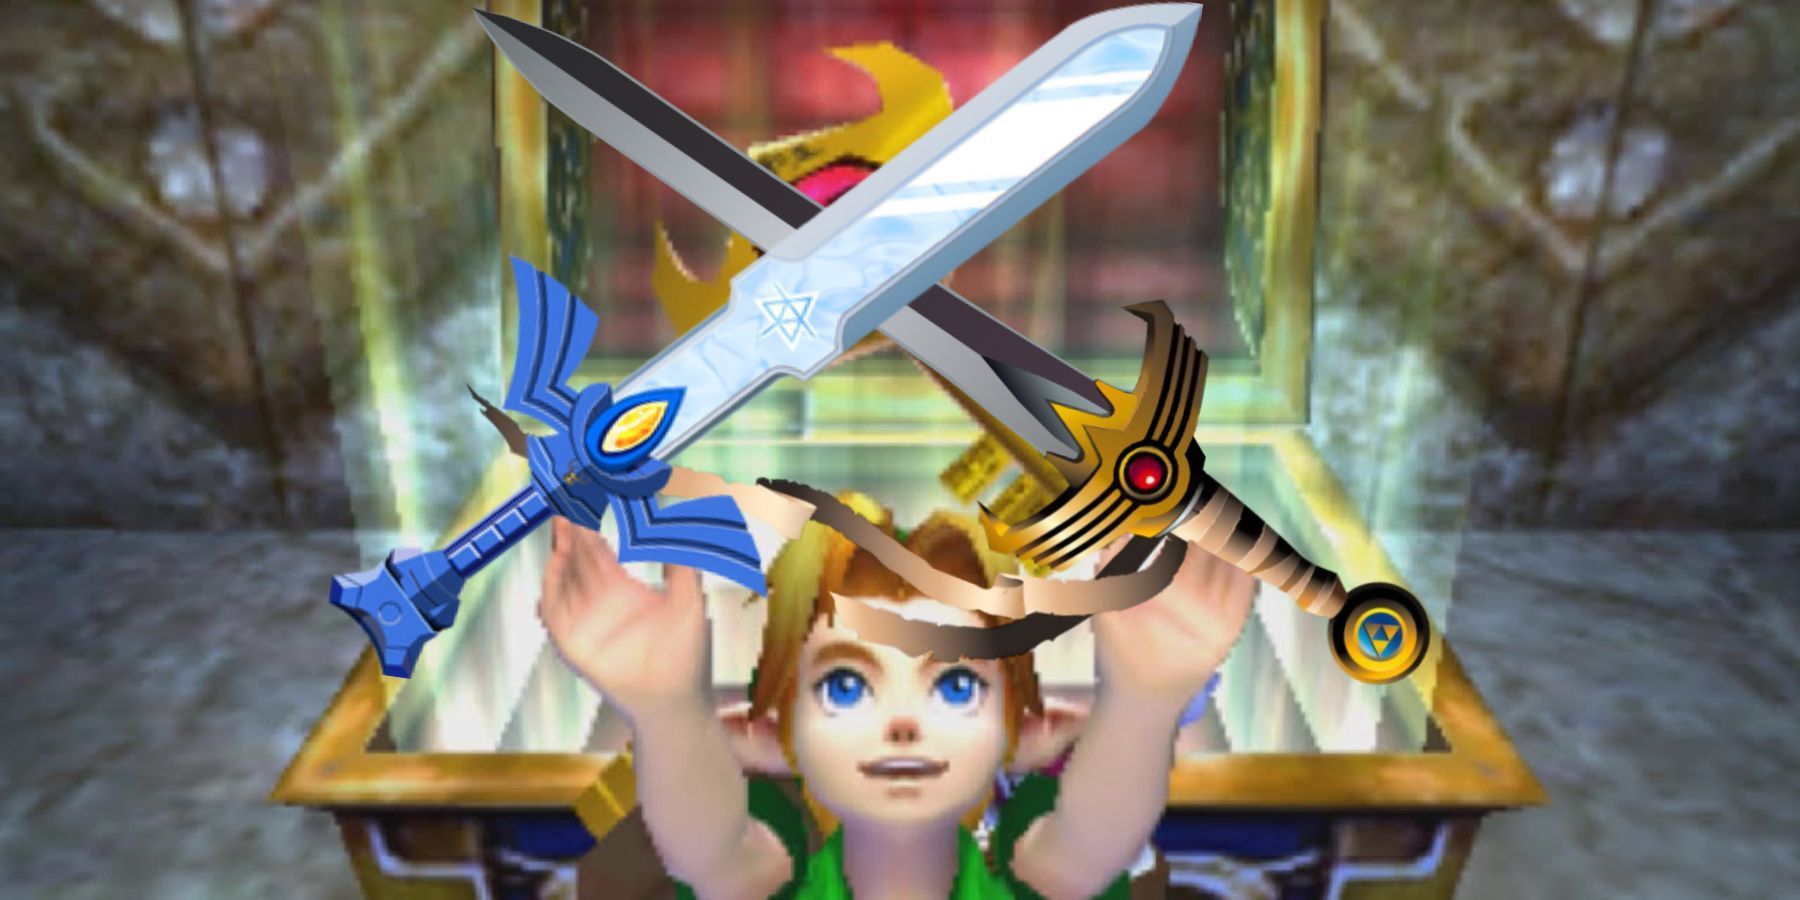 Link with Master Sword and Four Sword